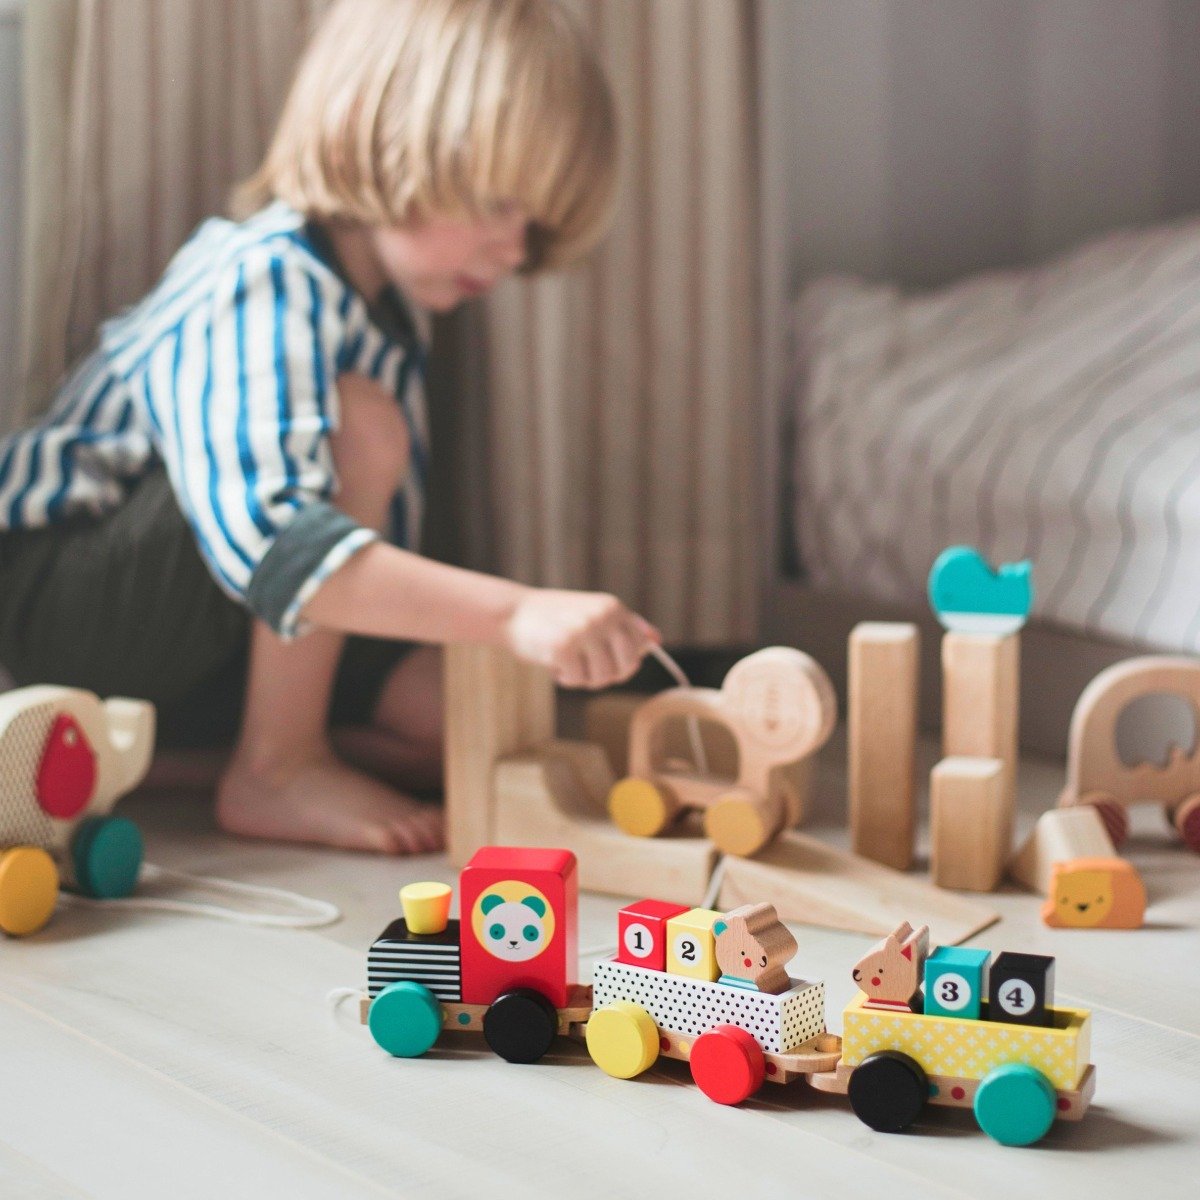 Wooden Pull Along Train Toy